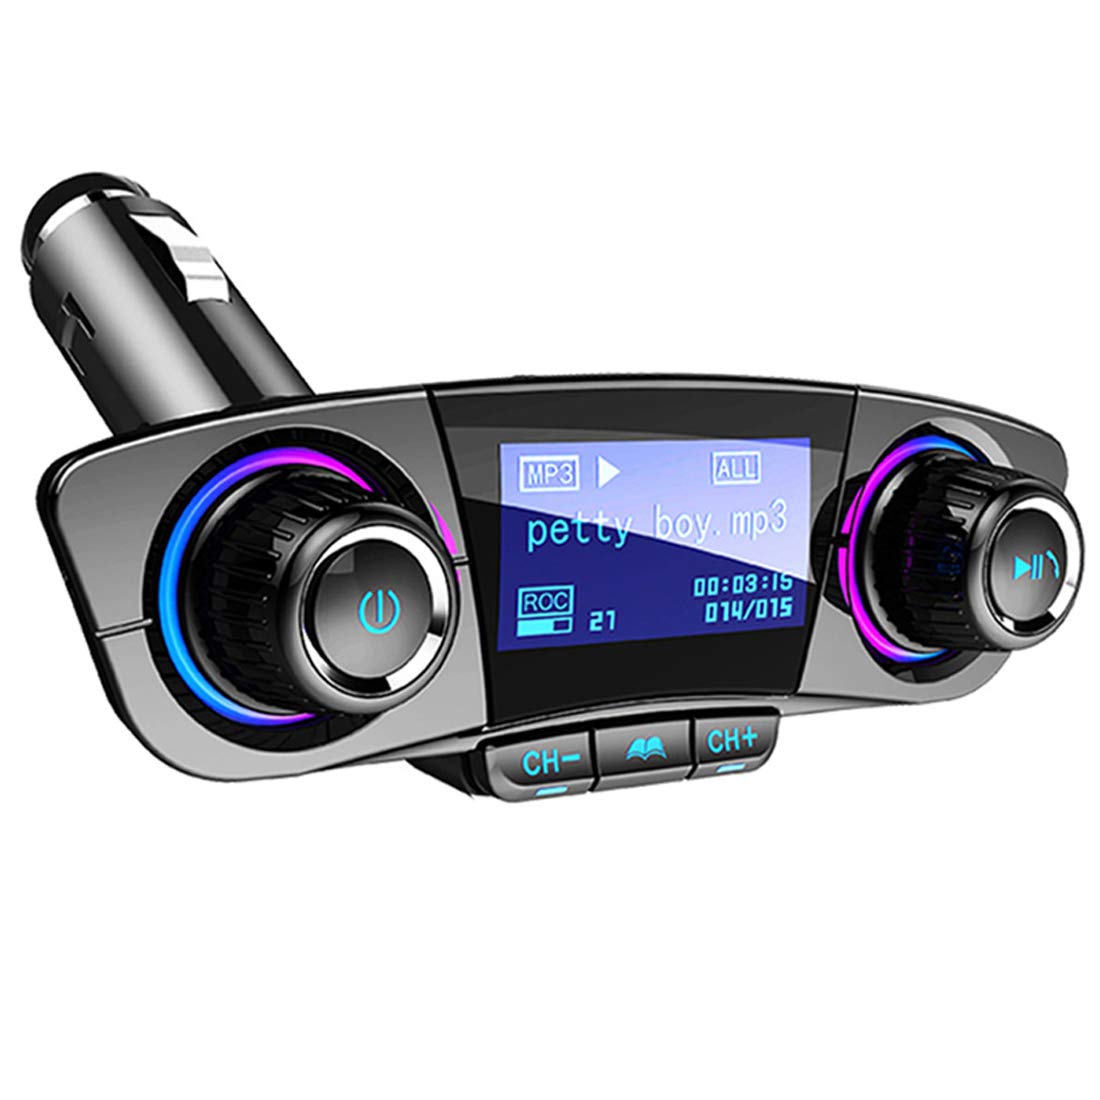 Bluetooth FM Transmitter Handfrees-Calling Radio Adapter Car Kit with Dual USB Port MP3 Player Support TF Card USB Flash Drive